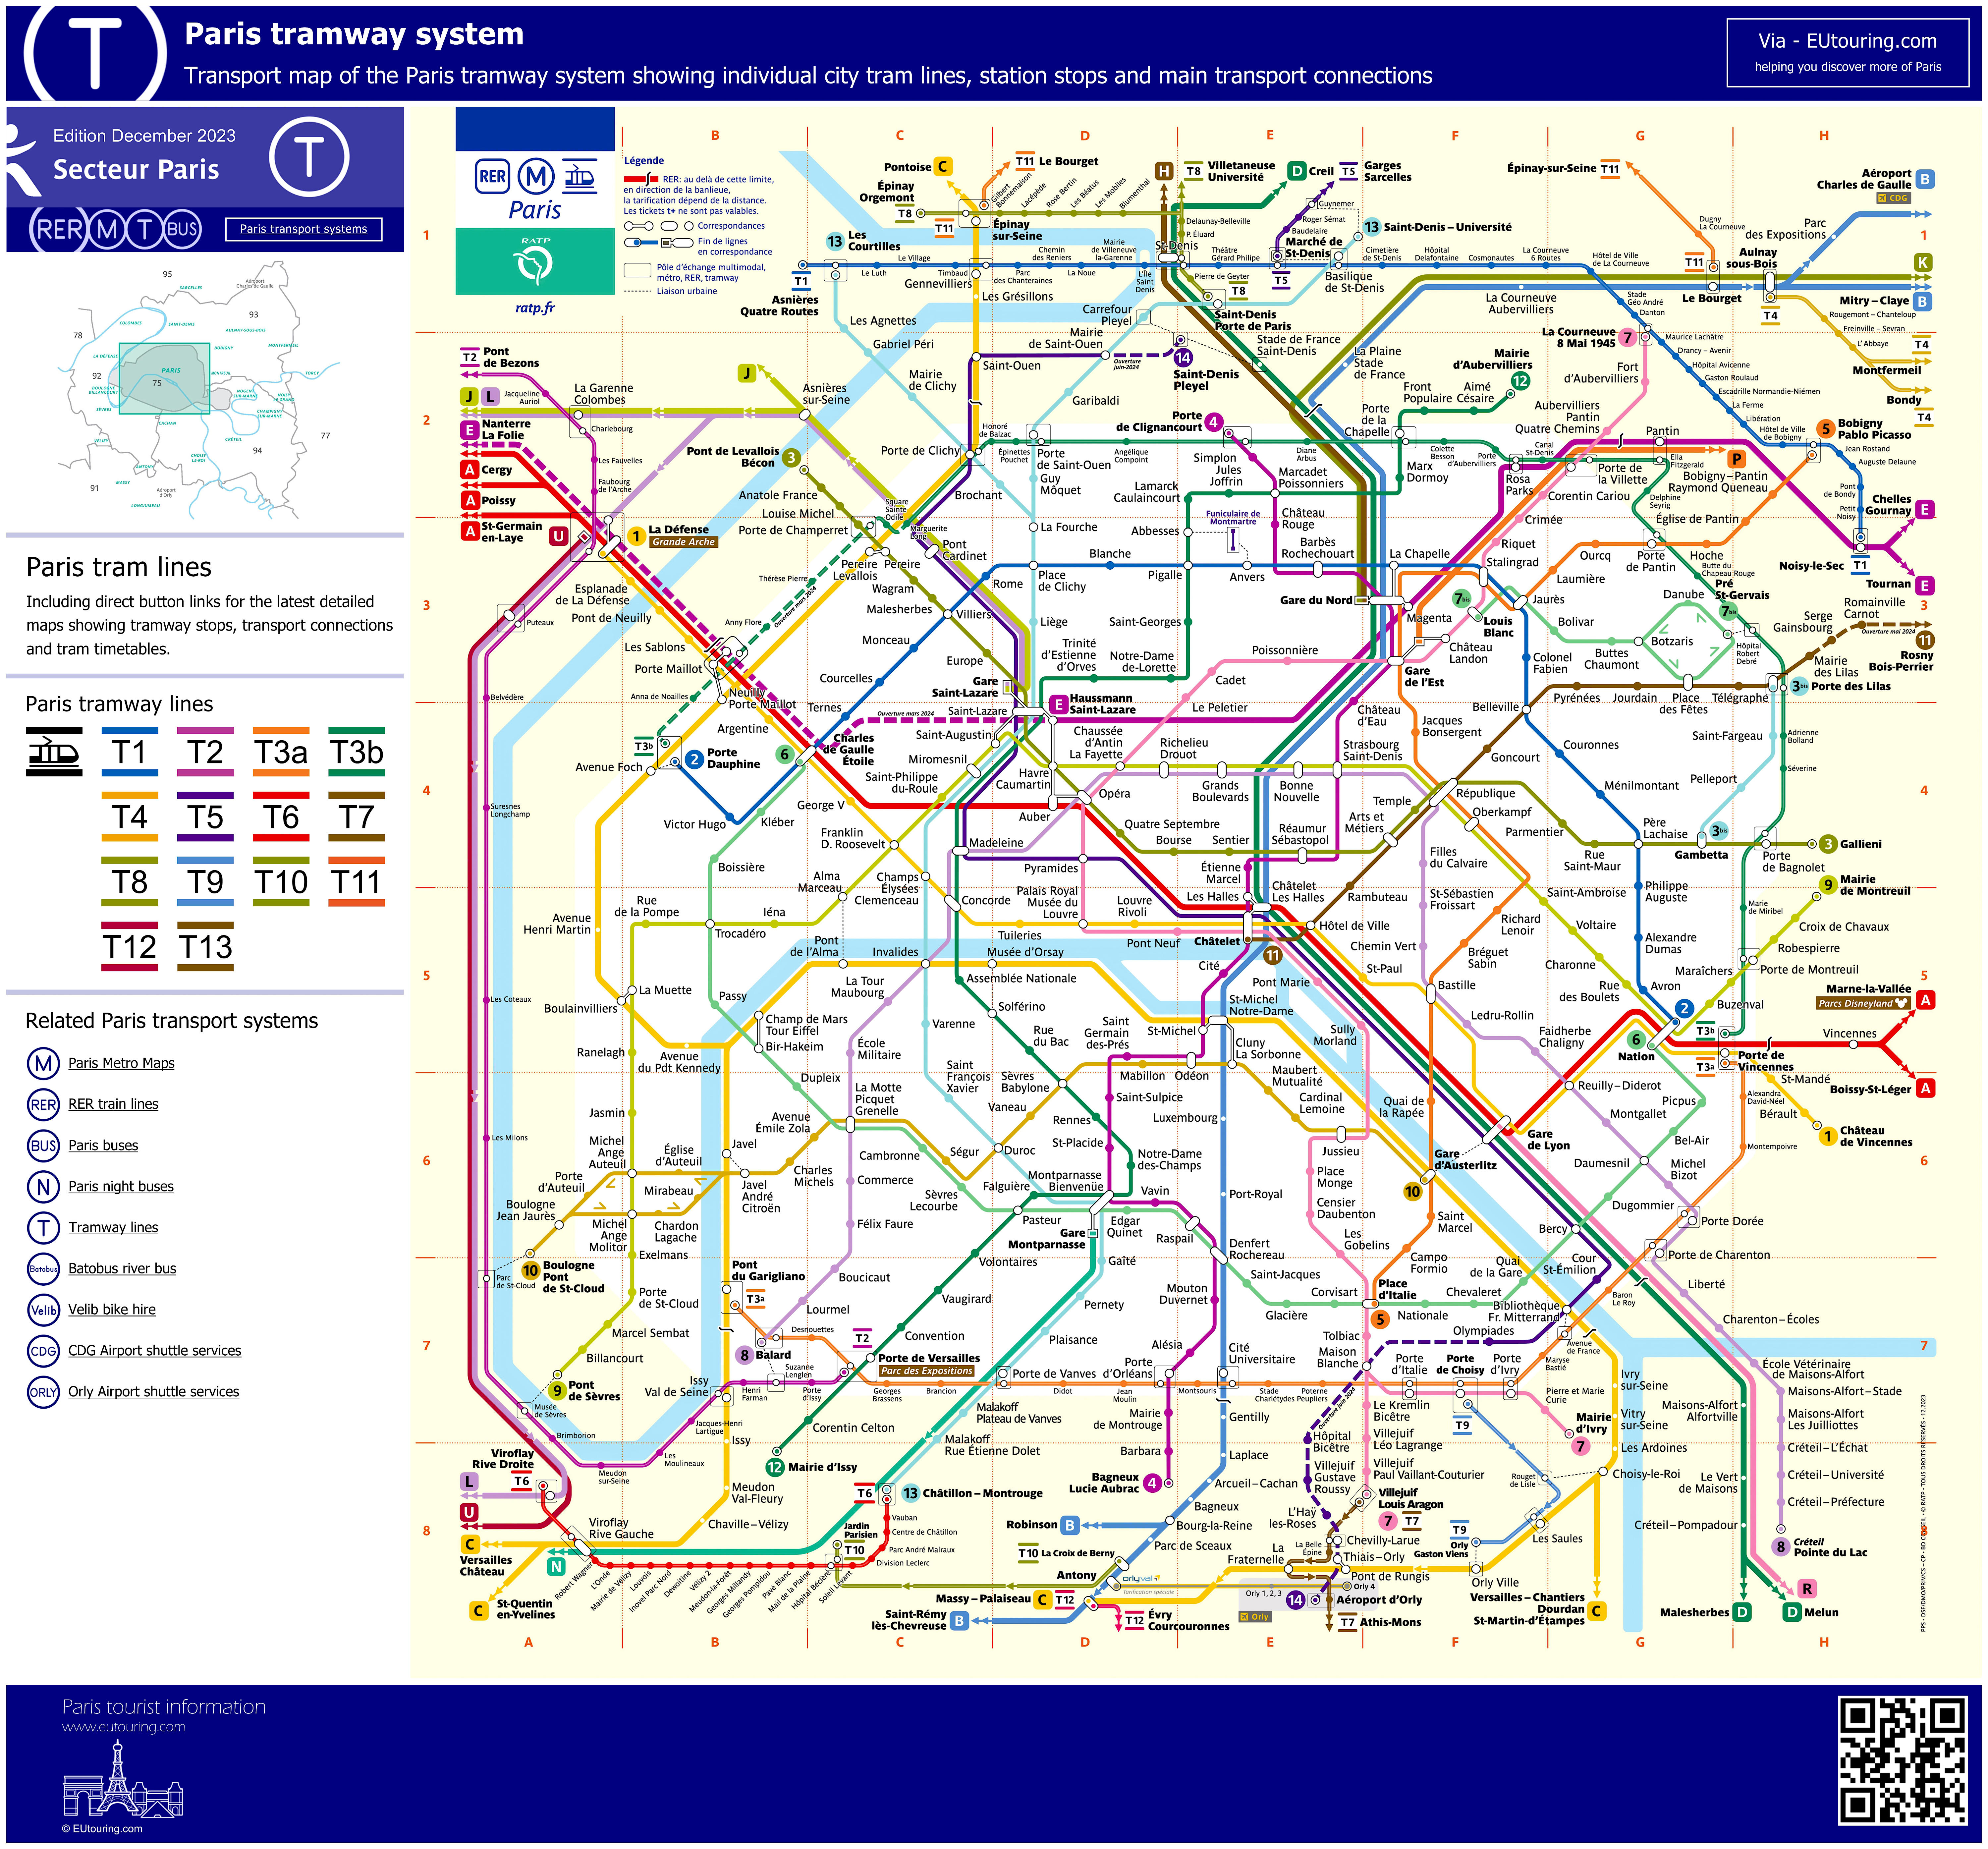 Paris tram maps and timetables for SNCF & RATP city tramways